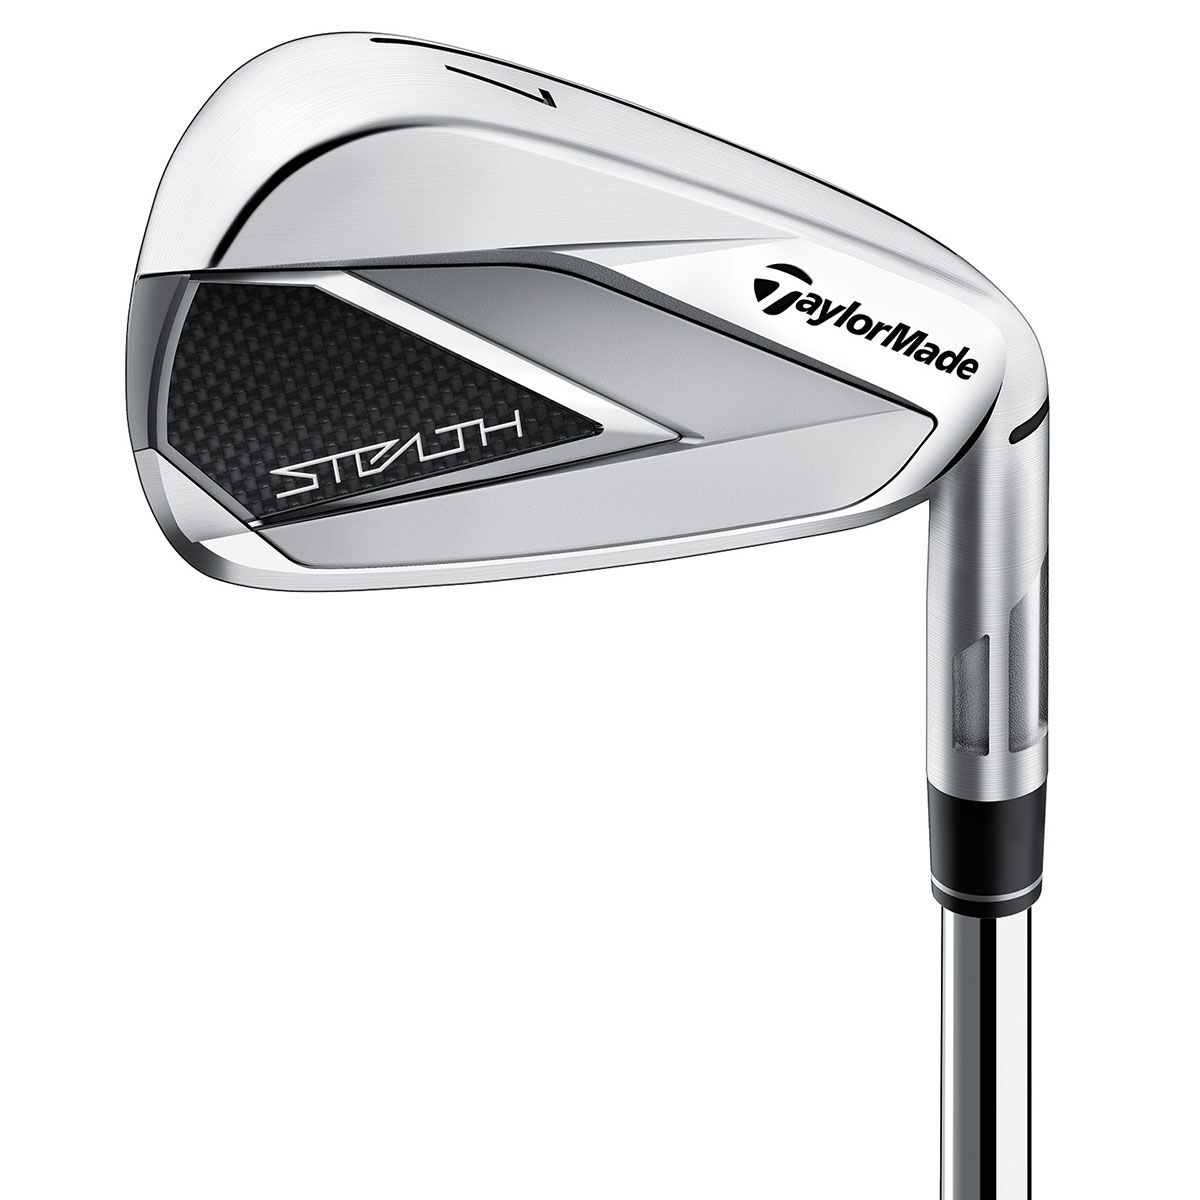 TaylorMade STEALTH Steel Golf Irons, Mens, 5-pw (6 irons), Right hand, Steel, Regular | American Golf von TaylorMade